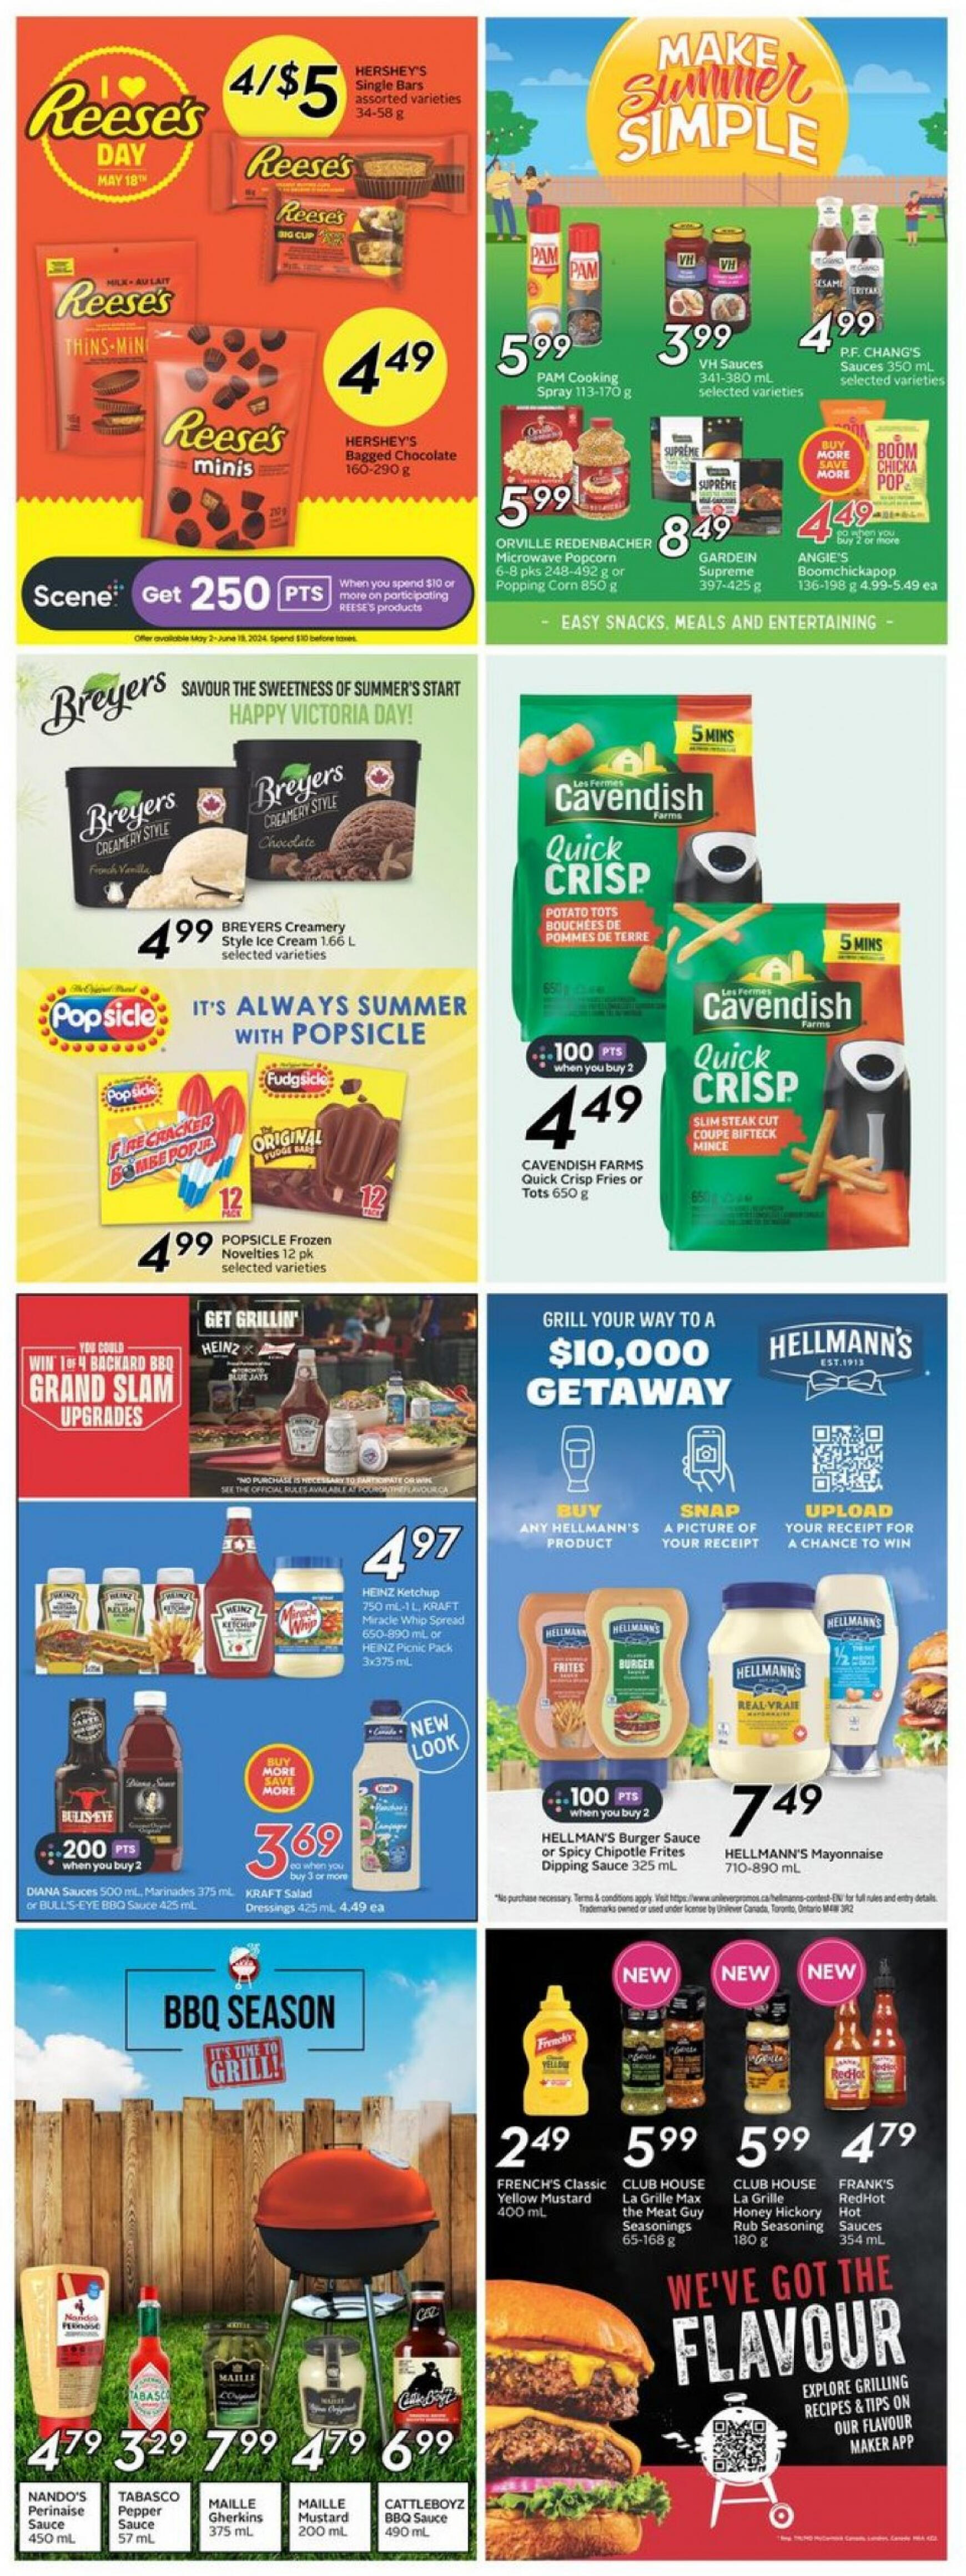 sobeys - Sobeys - Weekly Flyer - Ontario flyer current 16.05. - 22.05. - page: 22